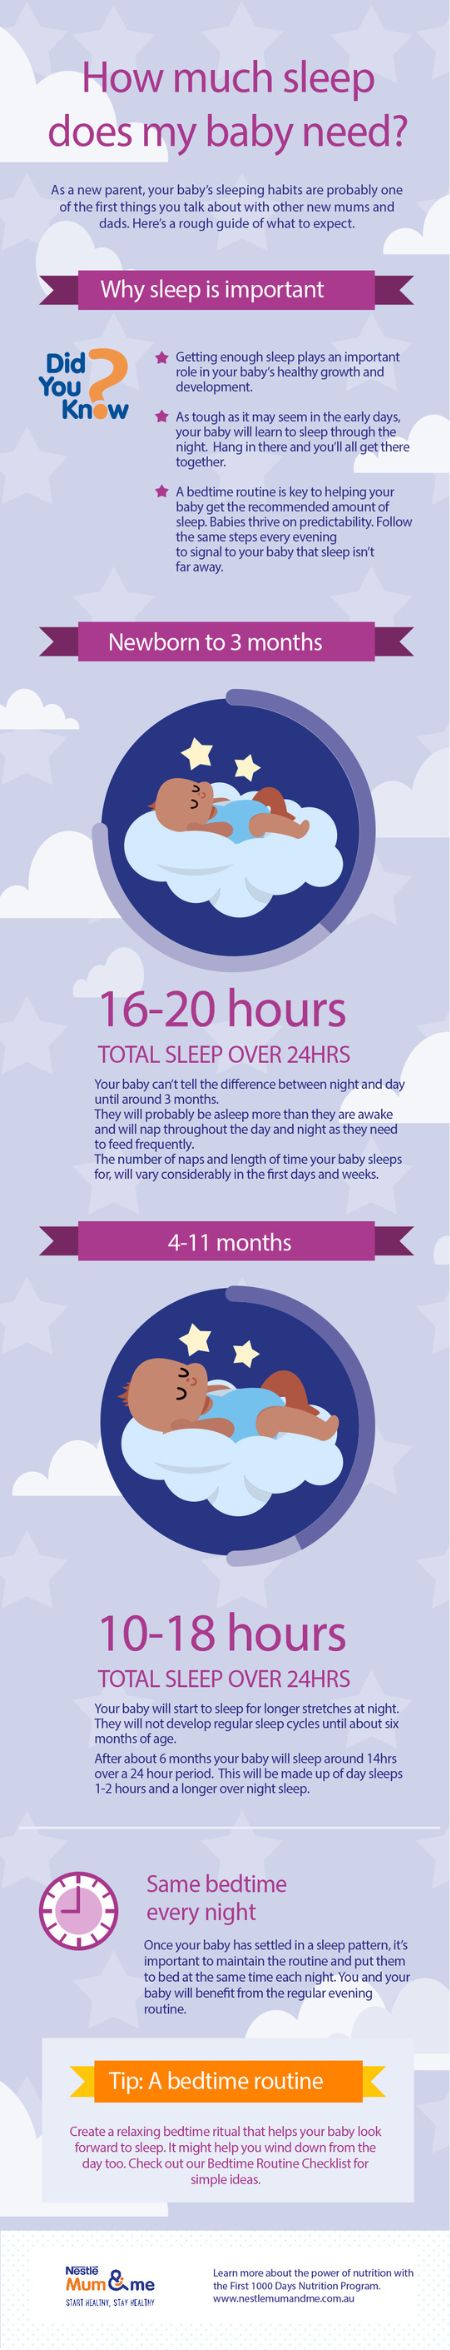 How much sleep does my baby need